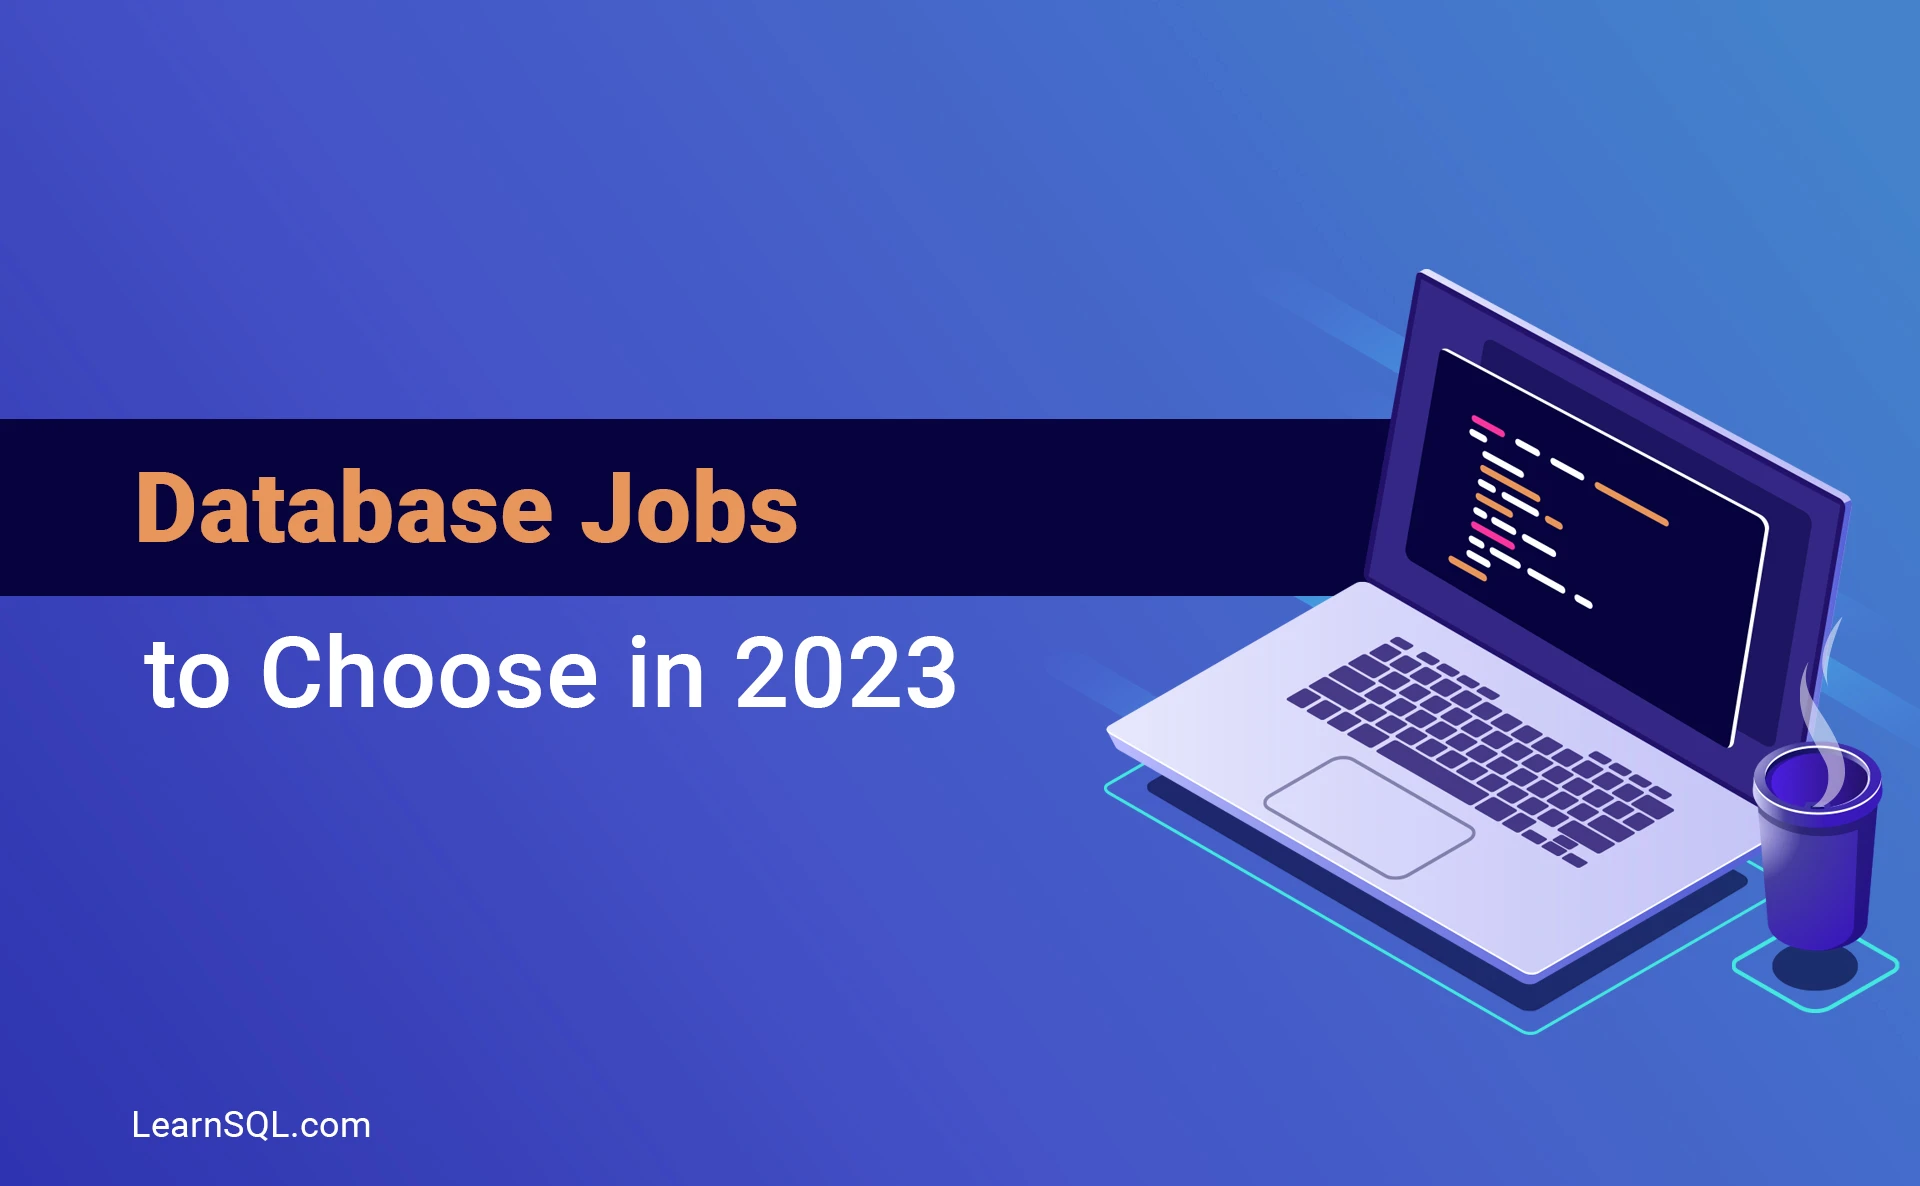 Database Jobs to Choose in 2023